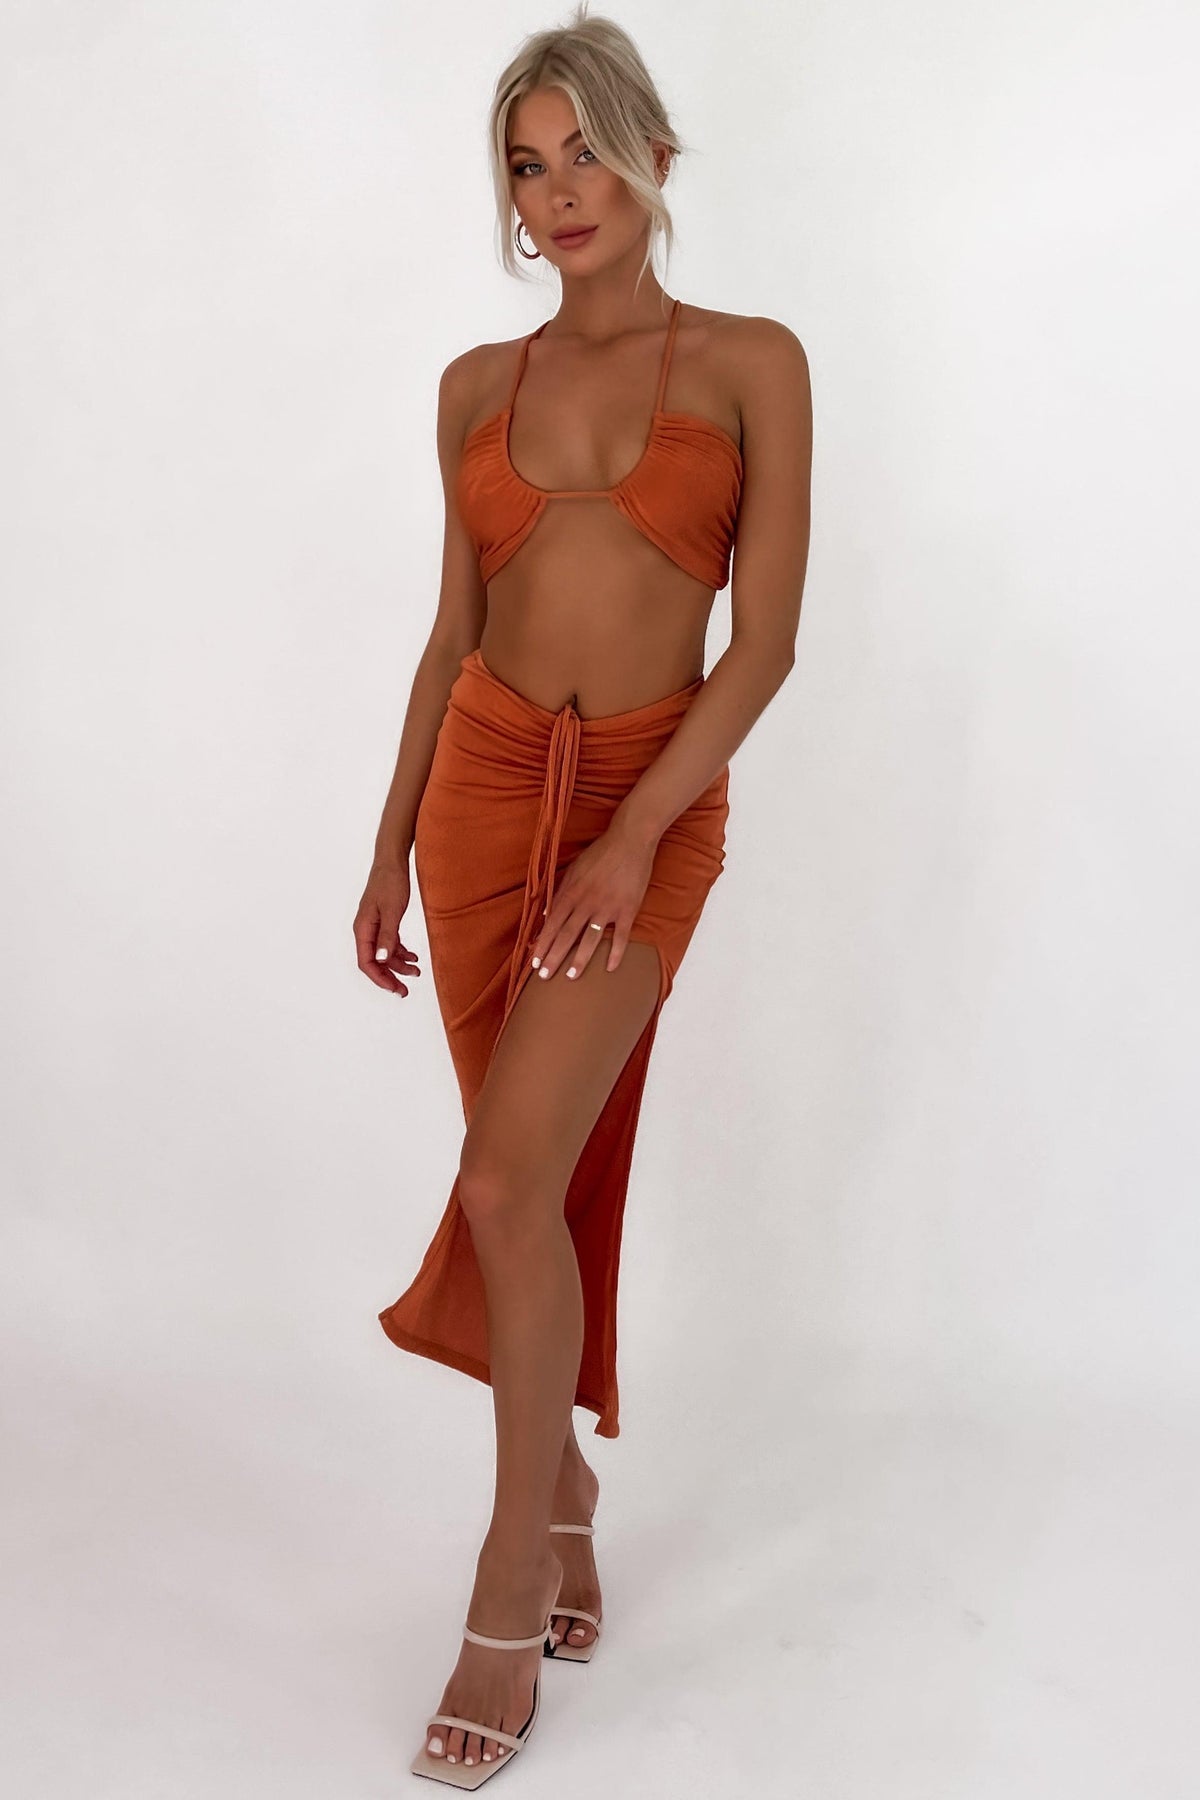 Alarna Top, CROP TOPS, ORANGE, POLYESTER &amp; SPANDEX, POLYESTER AND SPANDEX, Sale, SPANDEX &amp; POLYESTER, SPANDEX AND POLYESTER, TOP, TOPS, Our New Alarna Top Is Now Only $41.00 Exclusive At Mishkah, Our New Alarna Top is now only $41.00-We Have The Latest Women&#39;s Tops @ Mishkah Online Fashion Boutique-MISHKAH